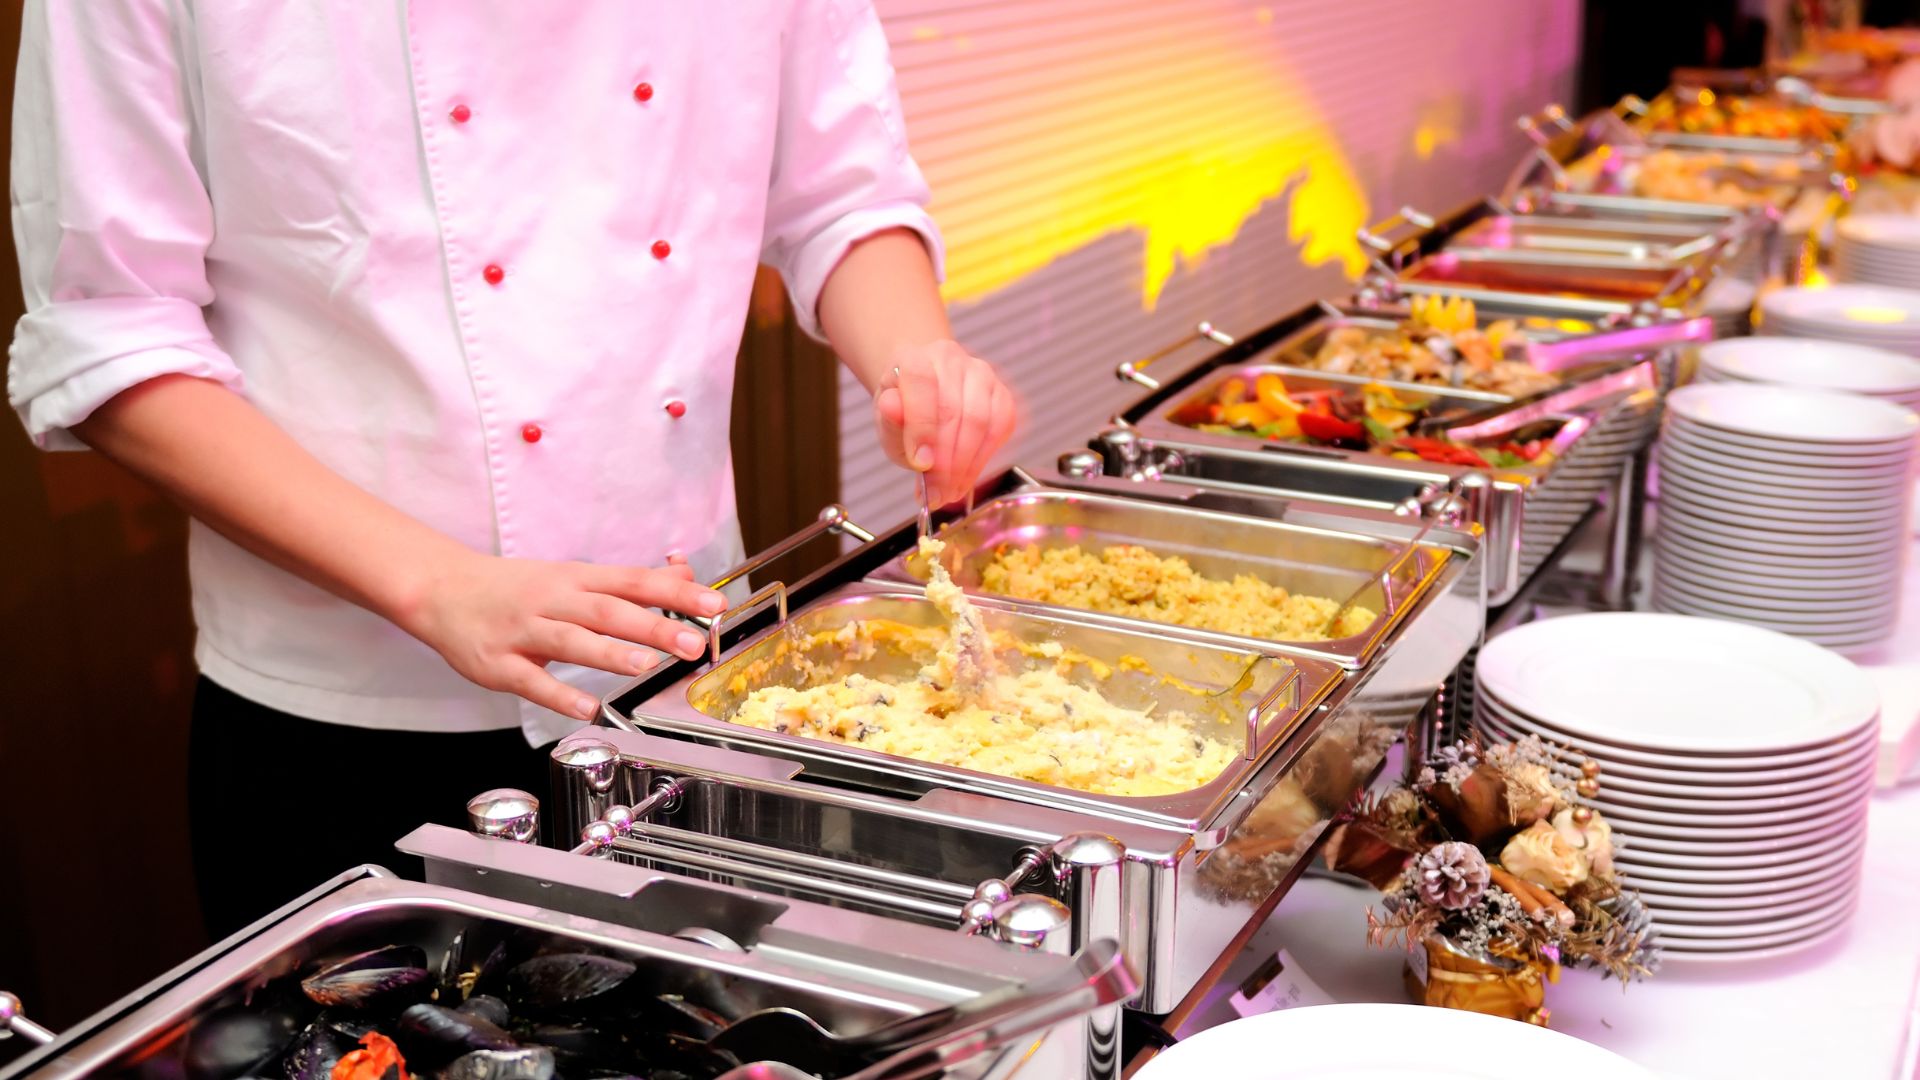 image showing a chef de partie at a food station serving food to guests